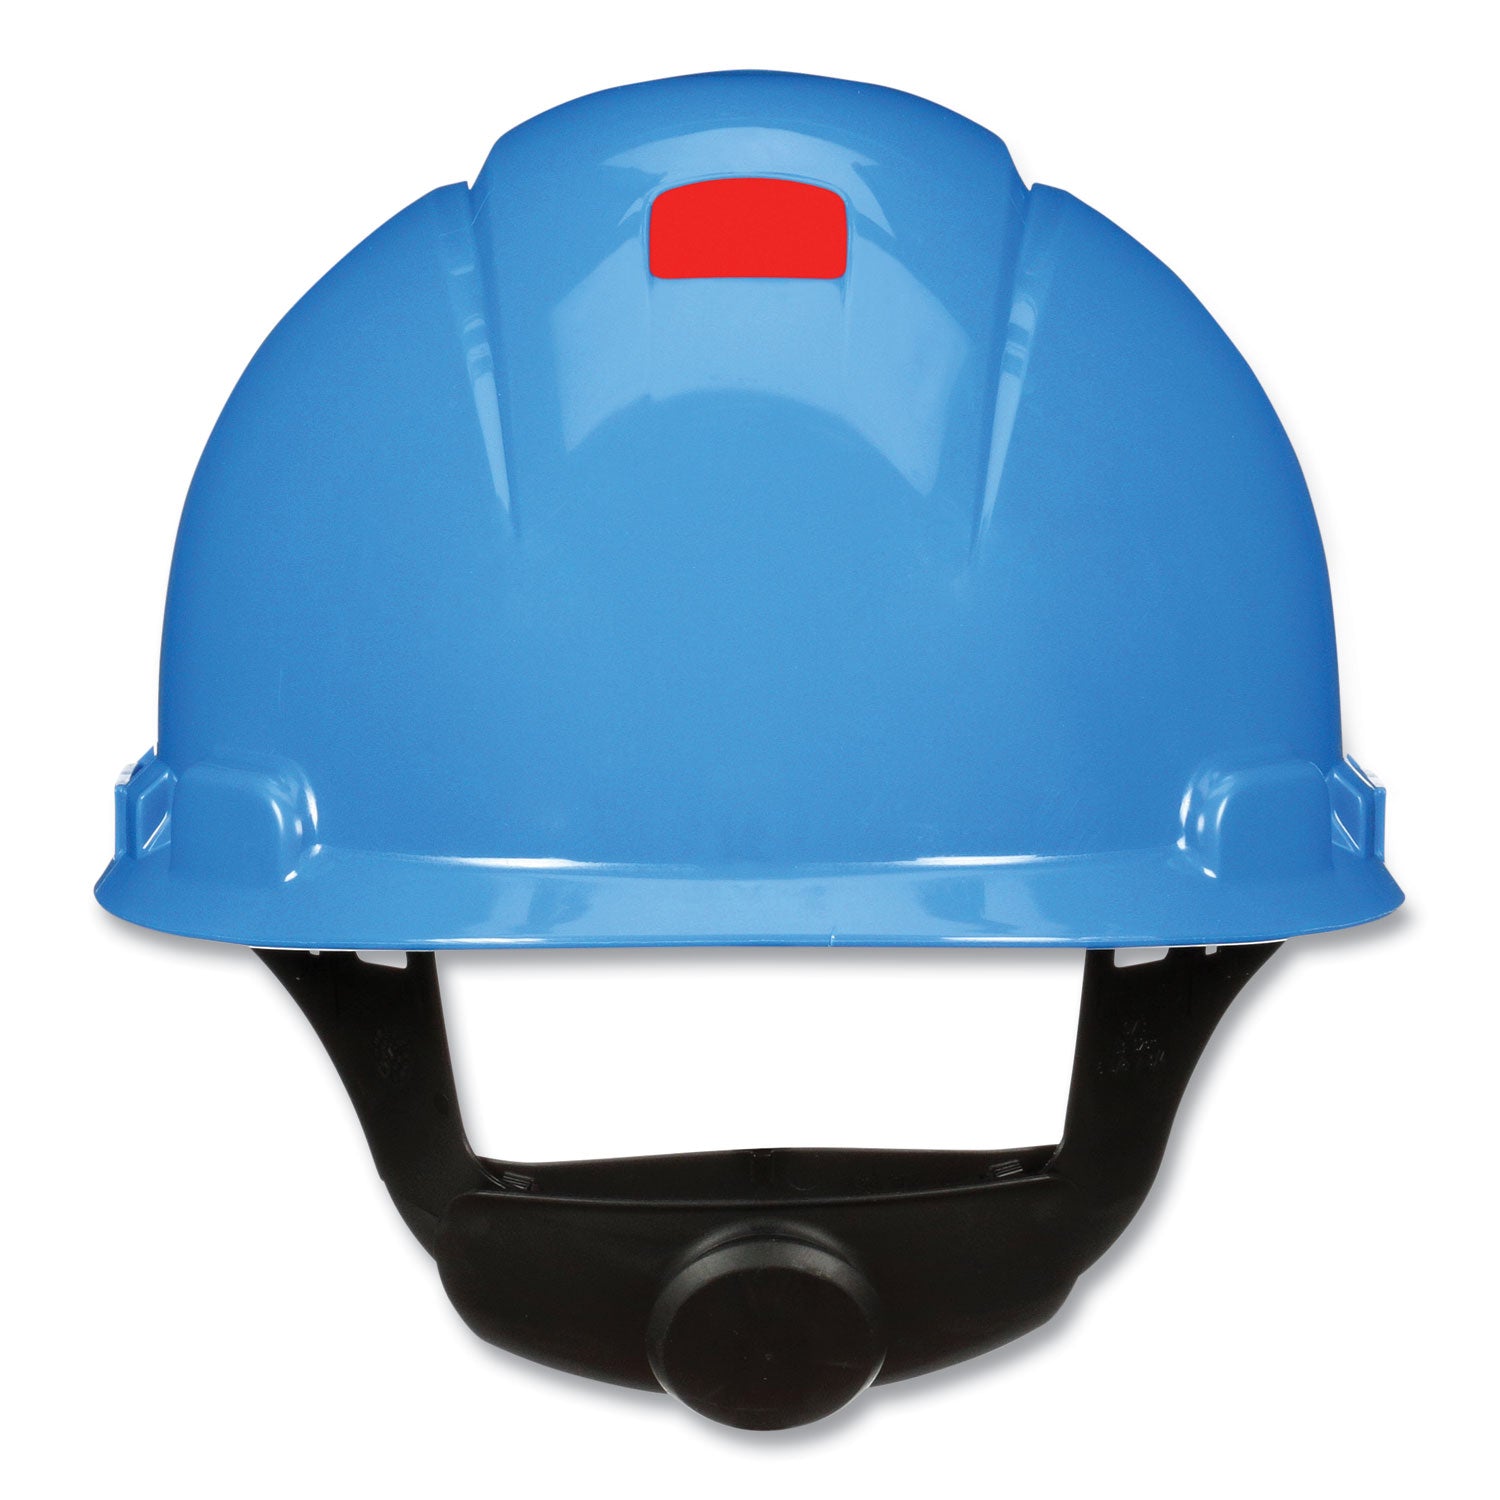 securefit-h-series-hard-hats-h-700-cap-with-uv-indicator-4-point-pressure-diffusion-ratchet-suspension-blue_mmmh703sfruv - 1